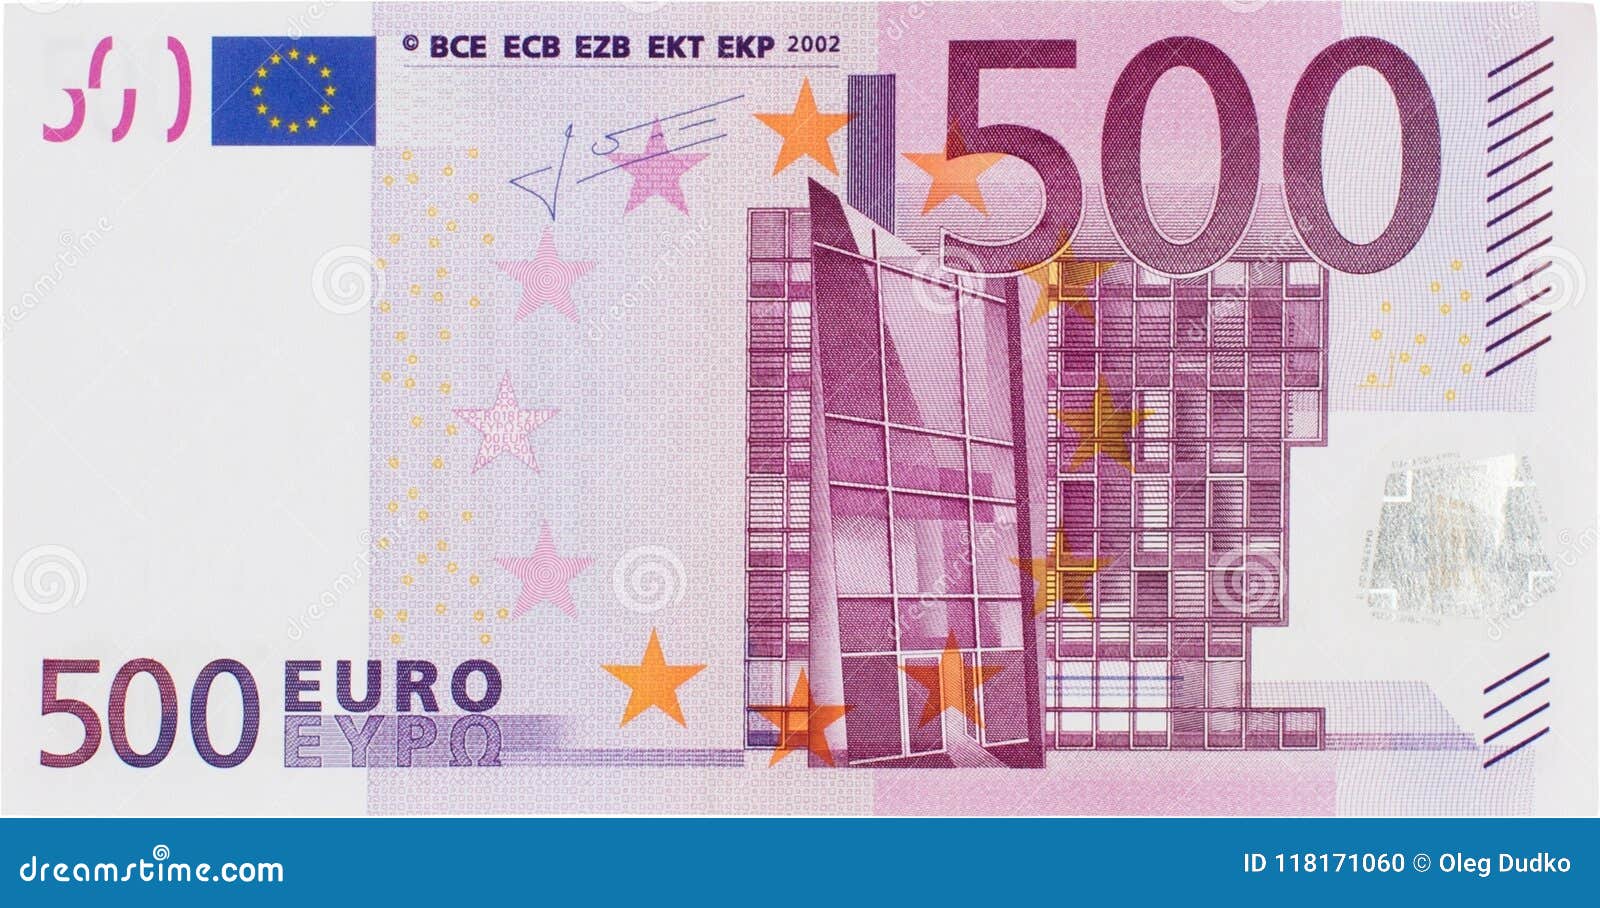 front view of a 500 euros bill